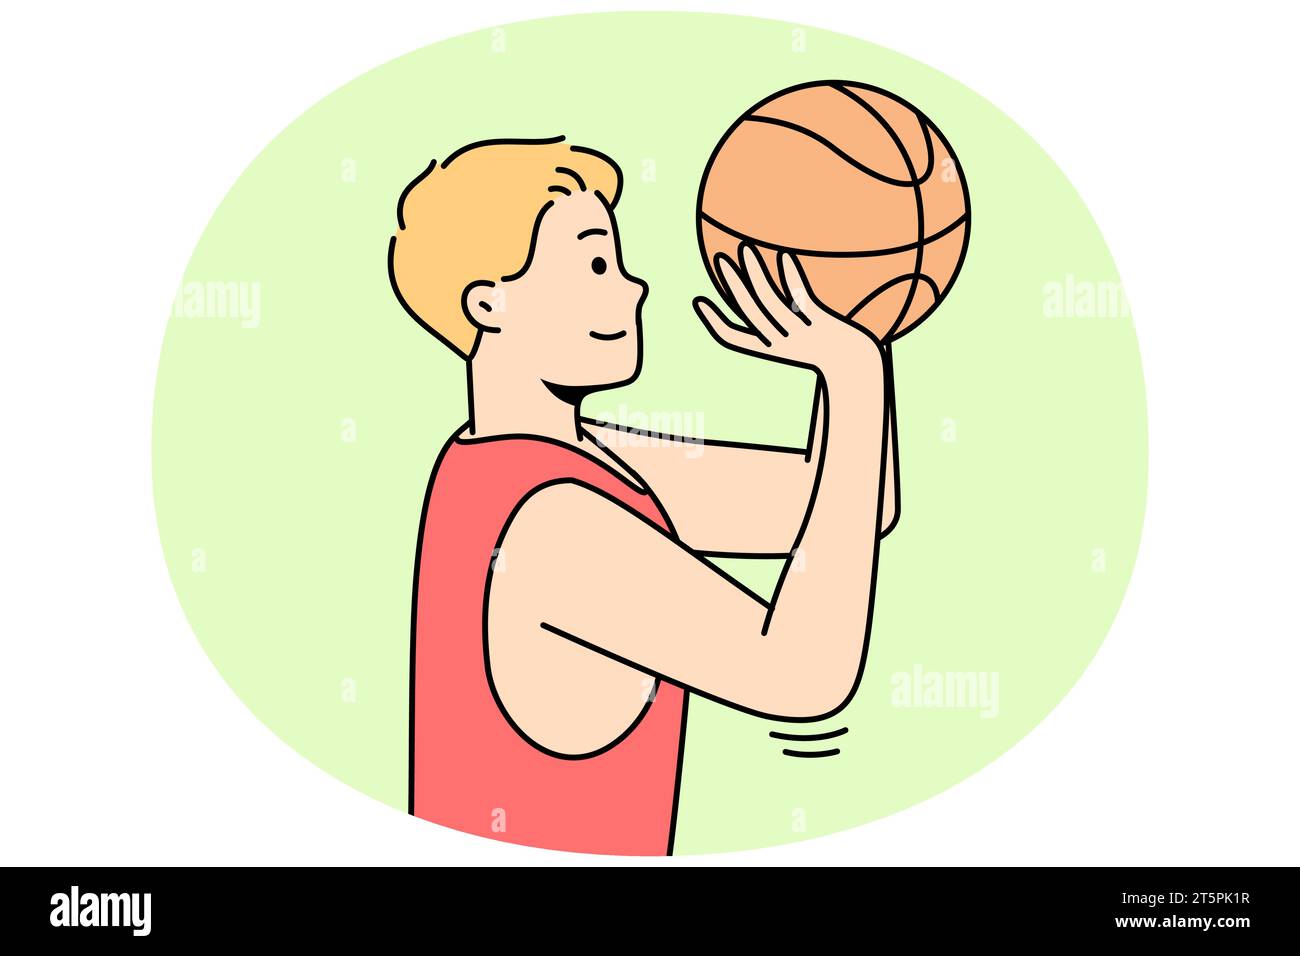 Boy throws ball into hoop or through net. Guy playing basketball or volleyball on court. Basketballer, hoopster, player trying to hit into rim. Sportsman practices drills. Young man training. Stock Vector